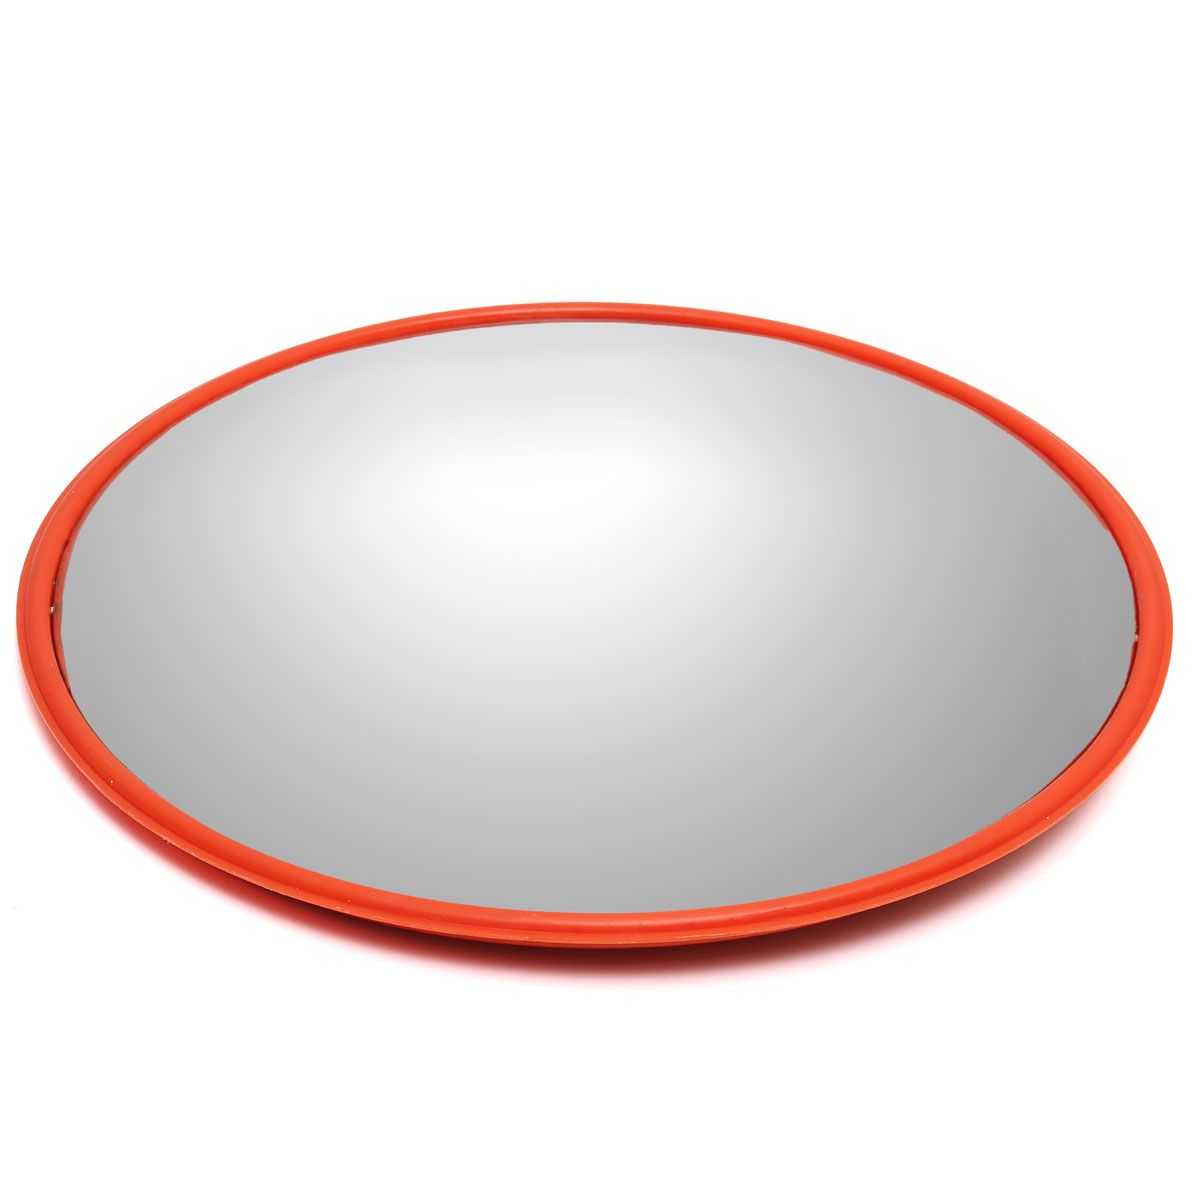 24-Inch-Wide-Angle-Security-Curved-Convex-Road-Mirror-Traffic-Driveway-Safety-Mirrors-1315560